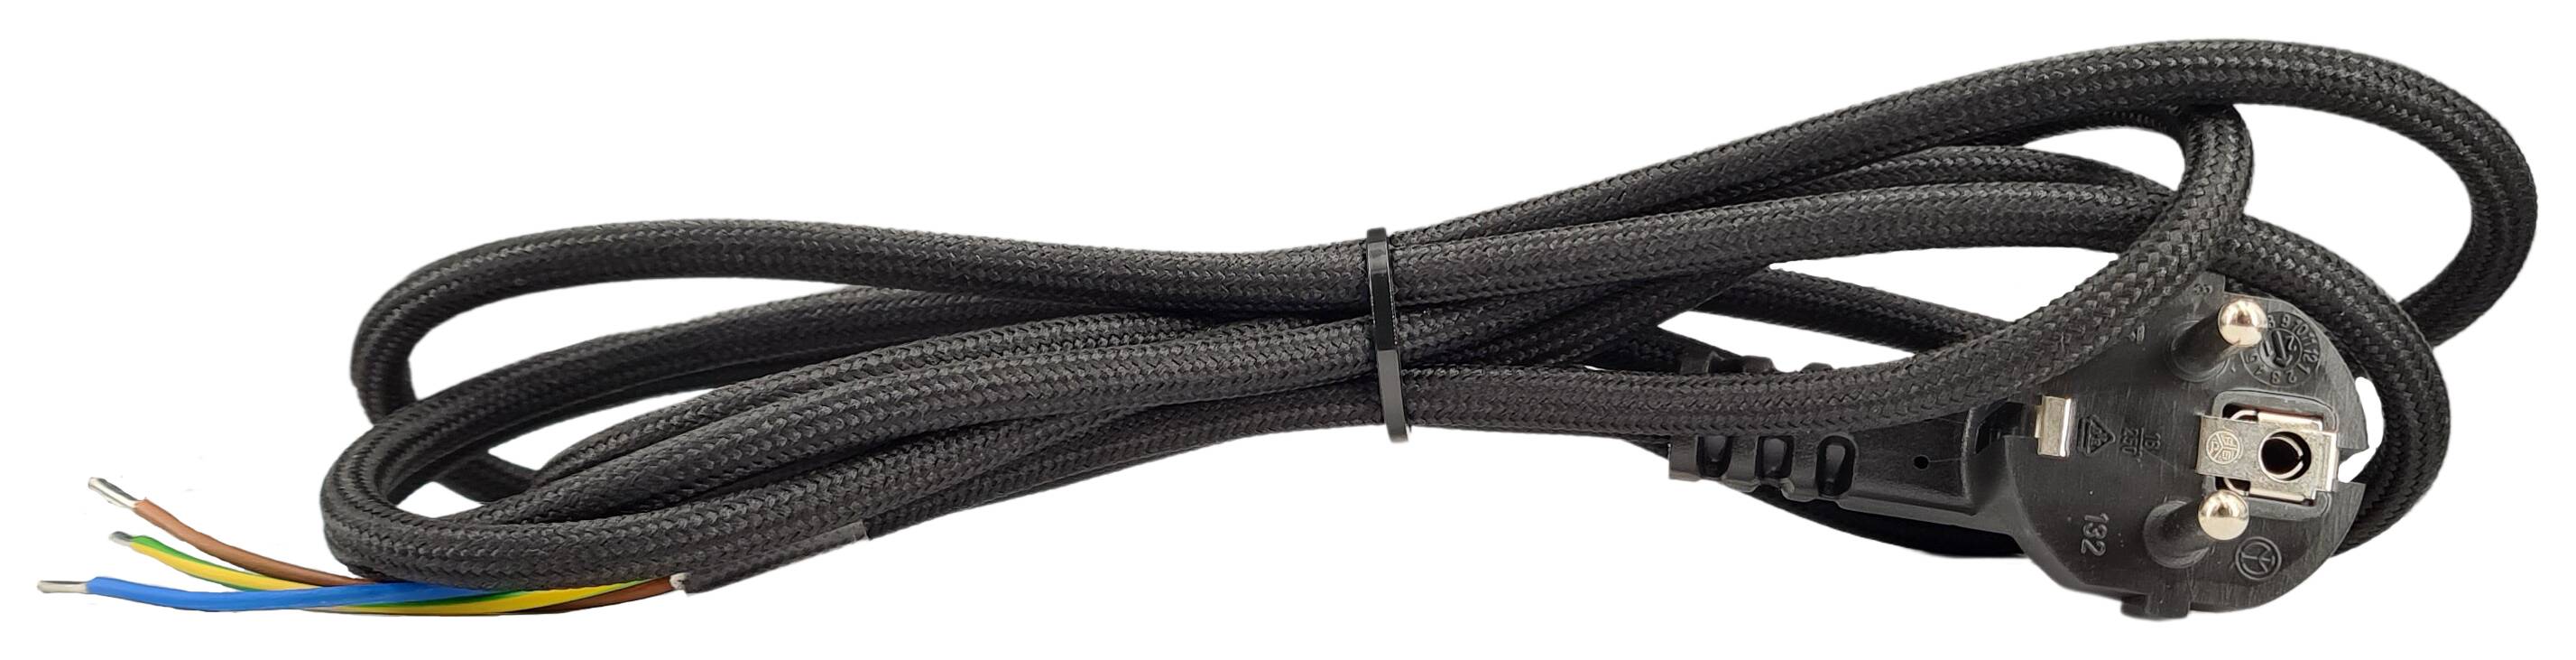 cord-set 3G 0,75/2300 round with schuko angled plug textile coated cable colour 615 black